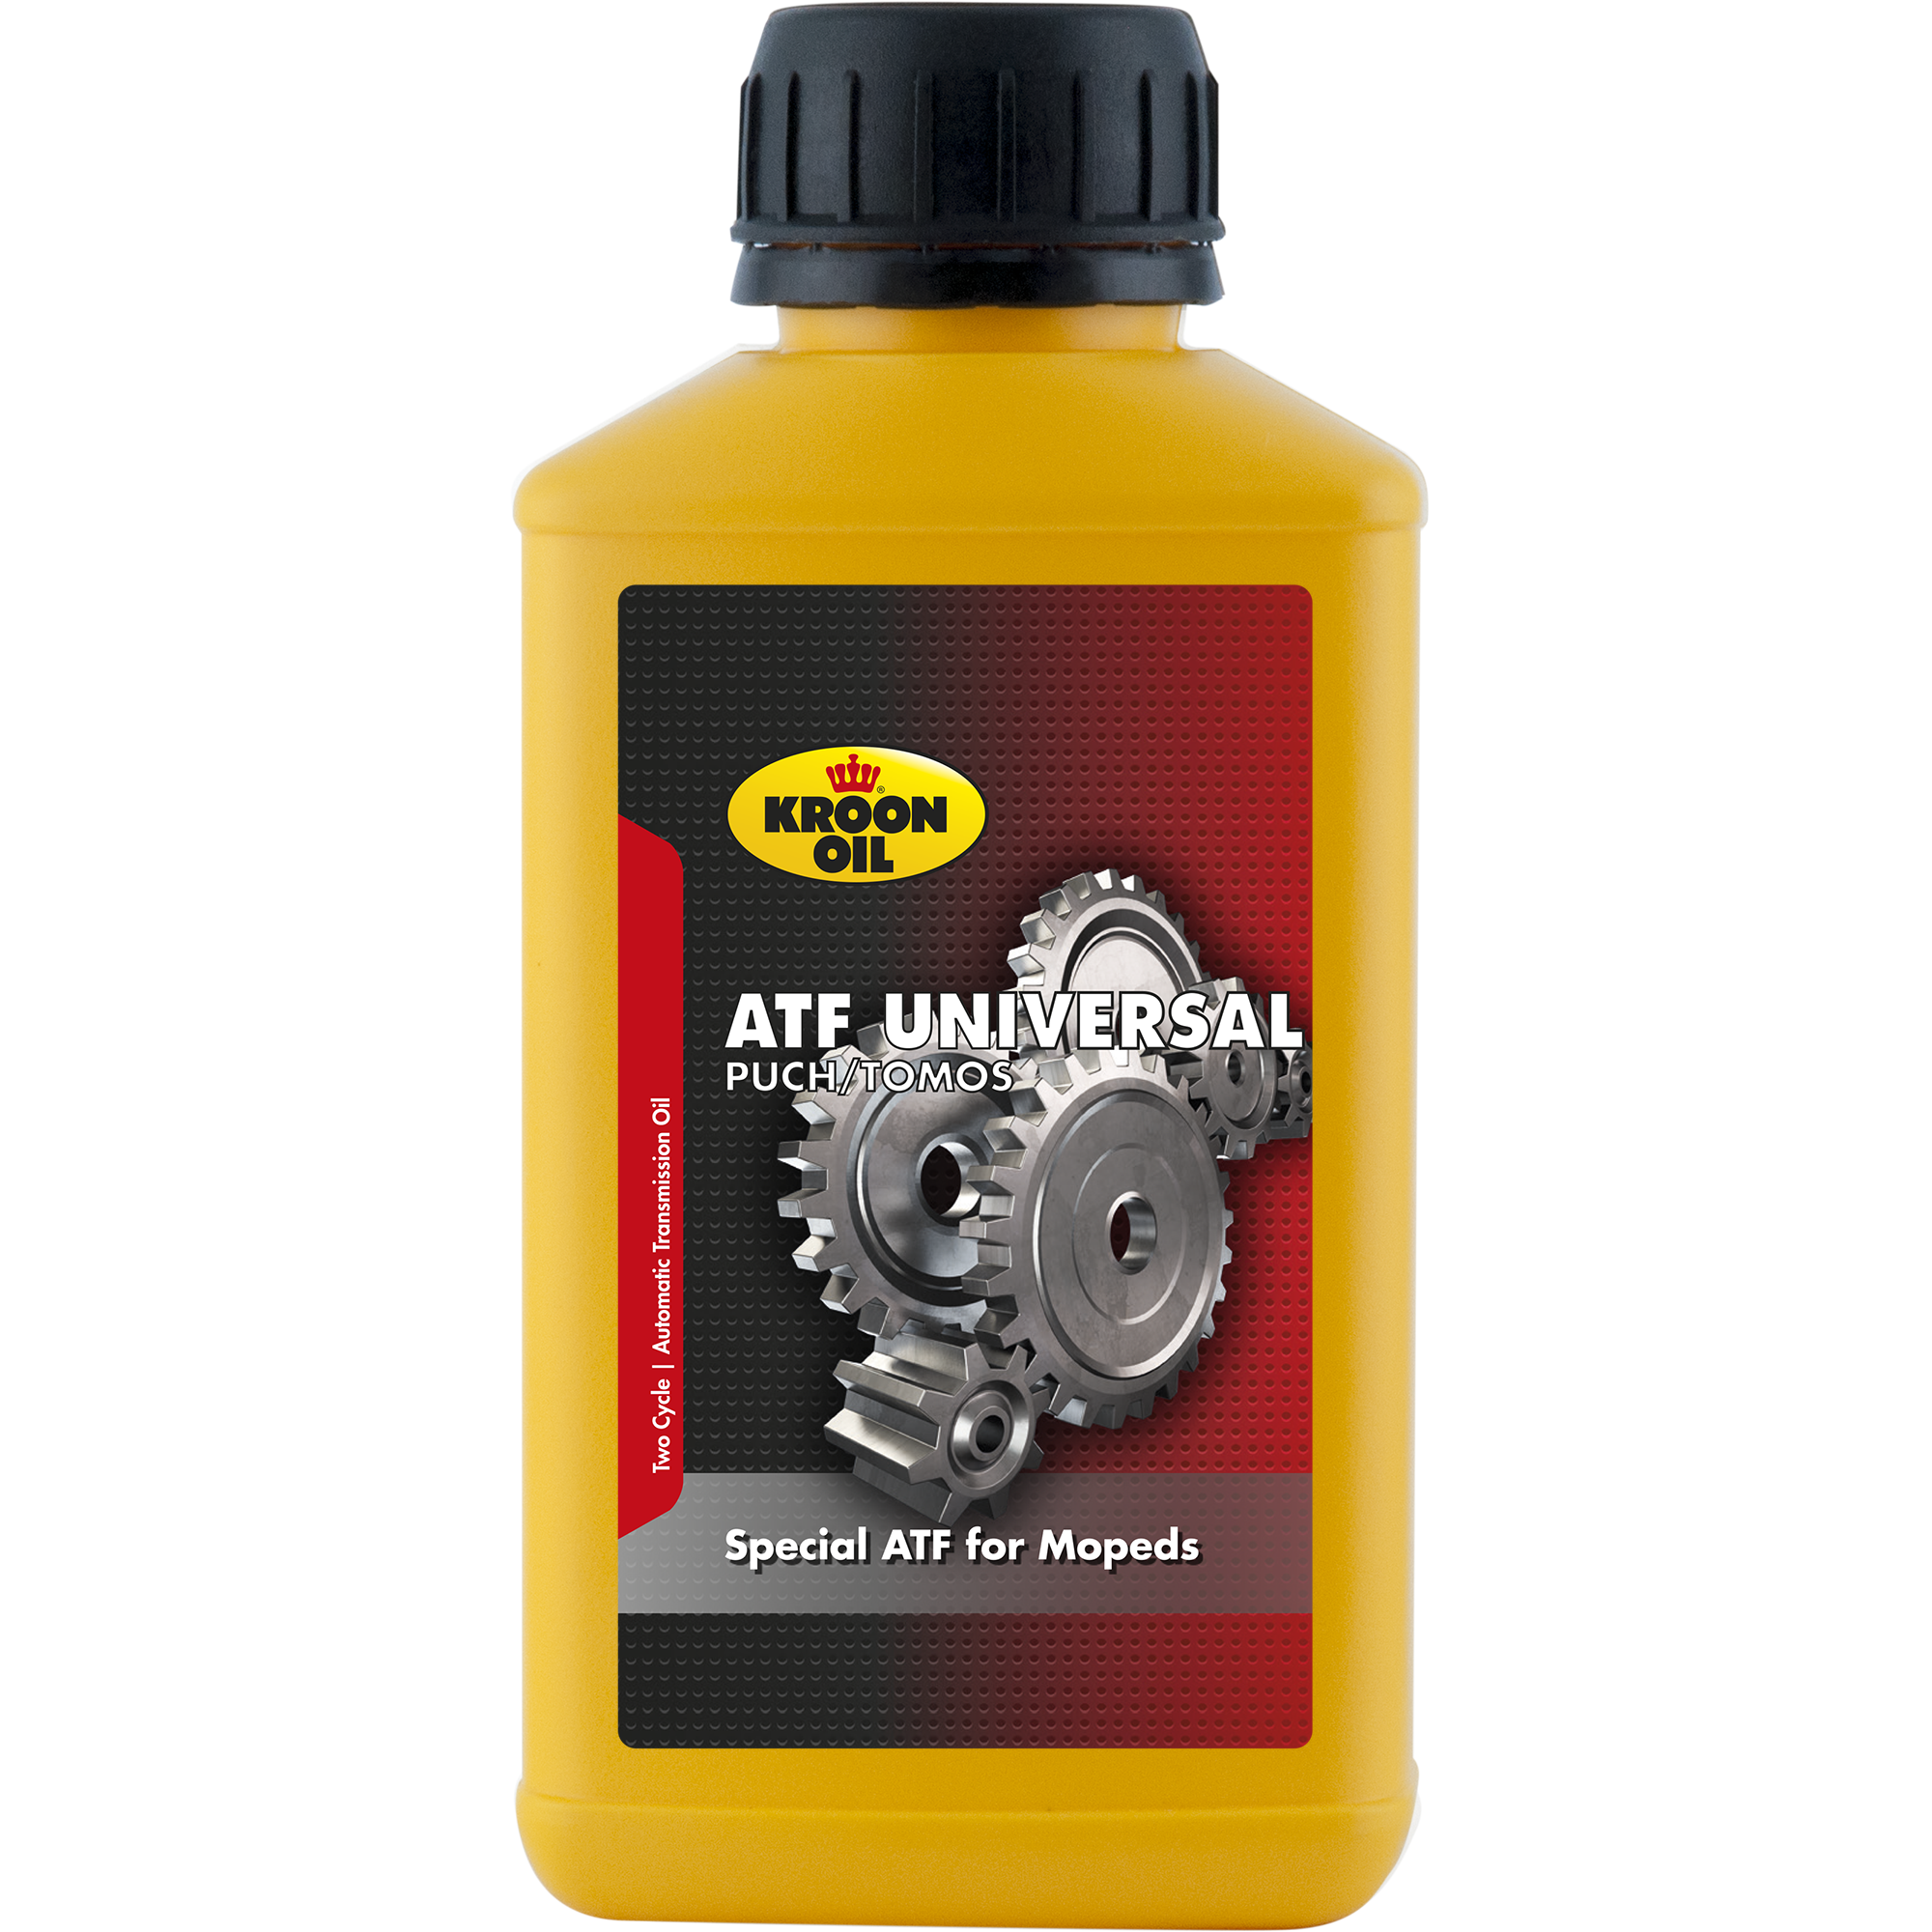 Kroon-Oil ATF Universal Puch/Tomos, 24 x 250 ml detail 2